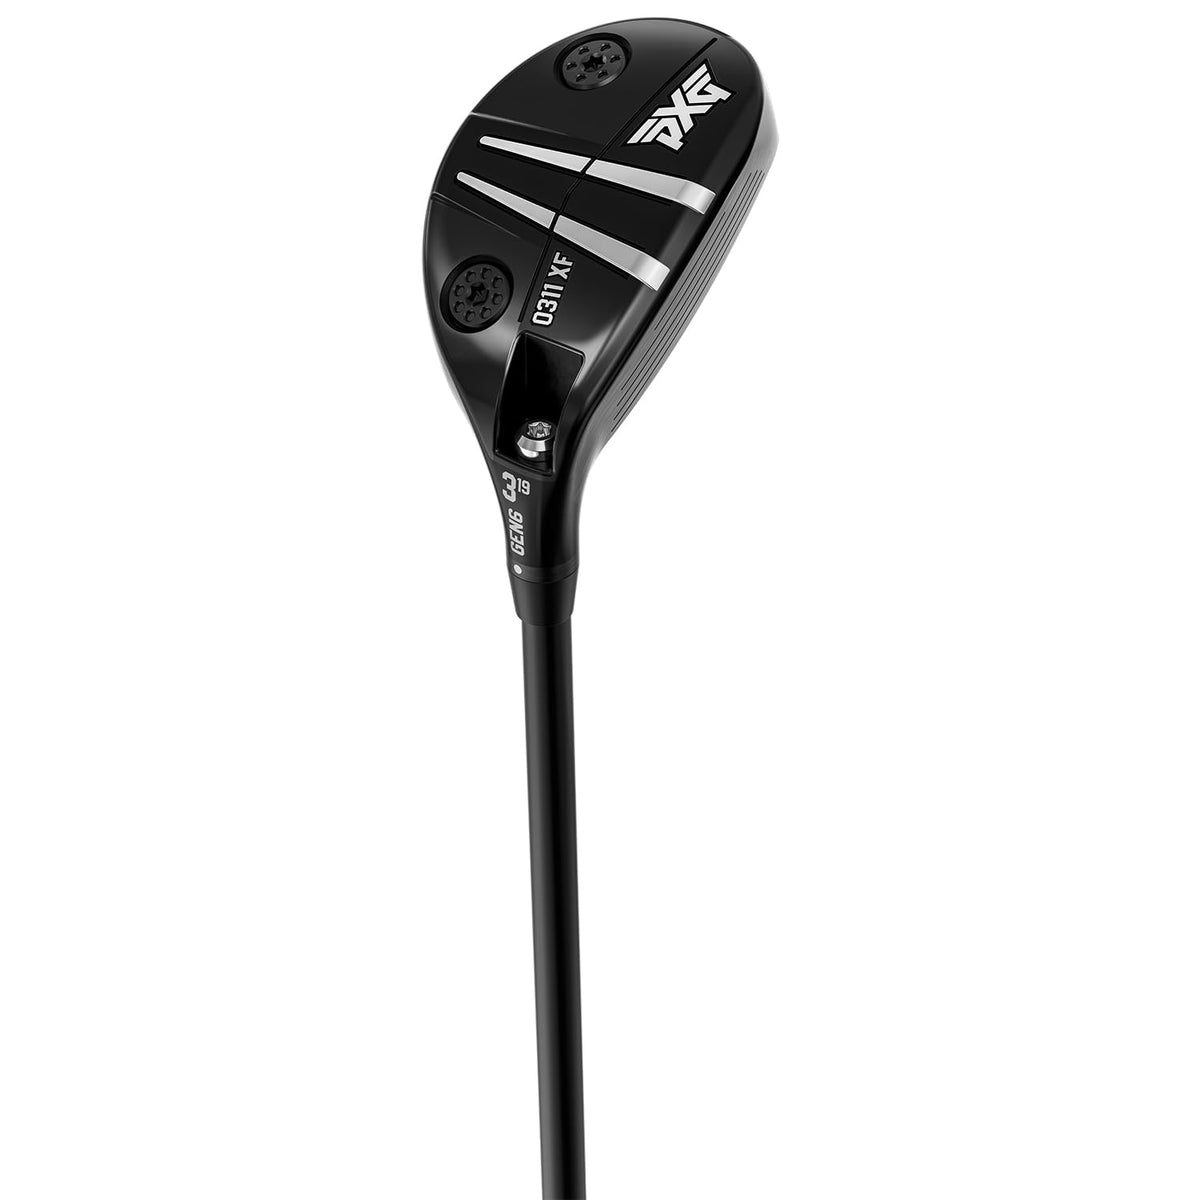 PXG Hybrid Golf Club - 0311 GEN6 XF Right Handed Hybrid Club in 19, 22, or 25 Degree Lofts with Adjustable Loft and Lie Hosel Available in Stiff, Regular, Senior, or Ladies Flex Graphite Shaft